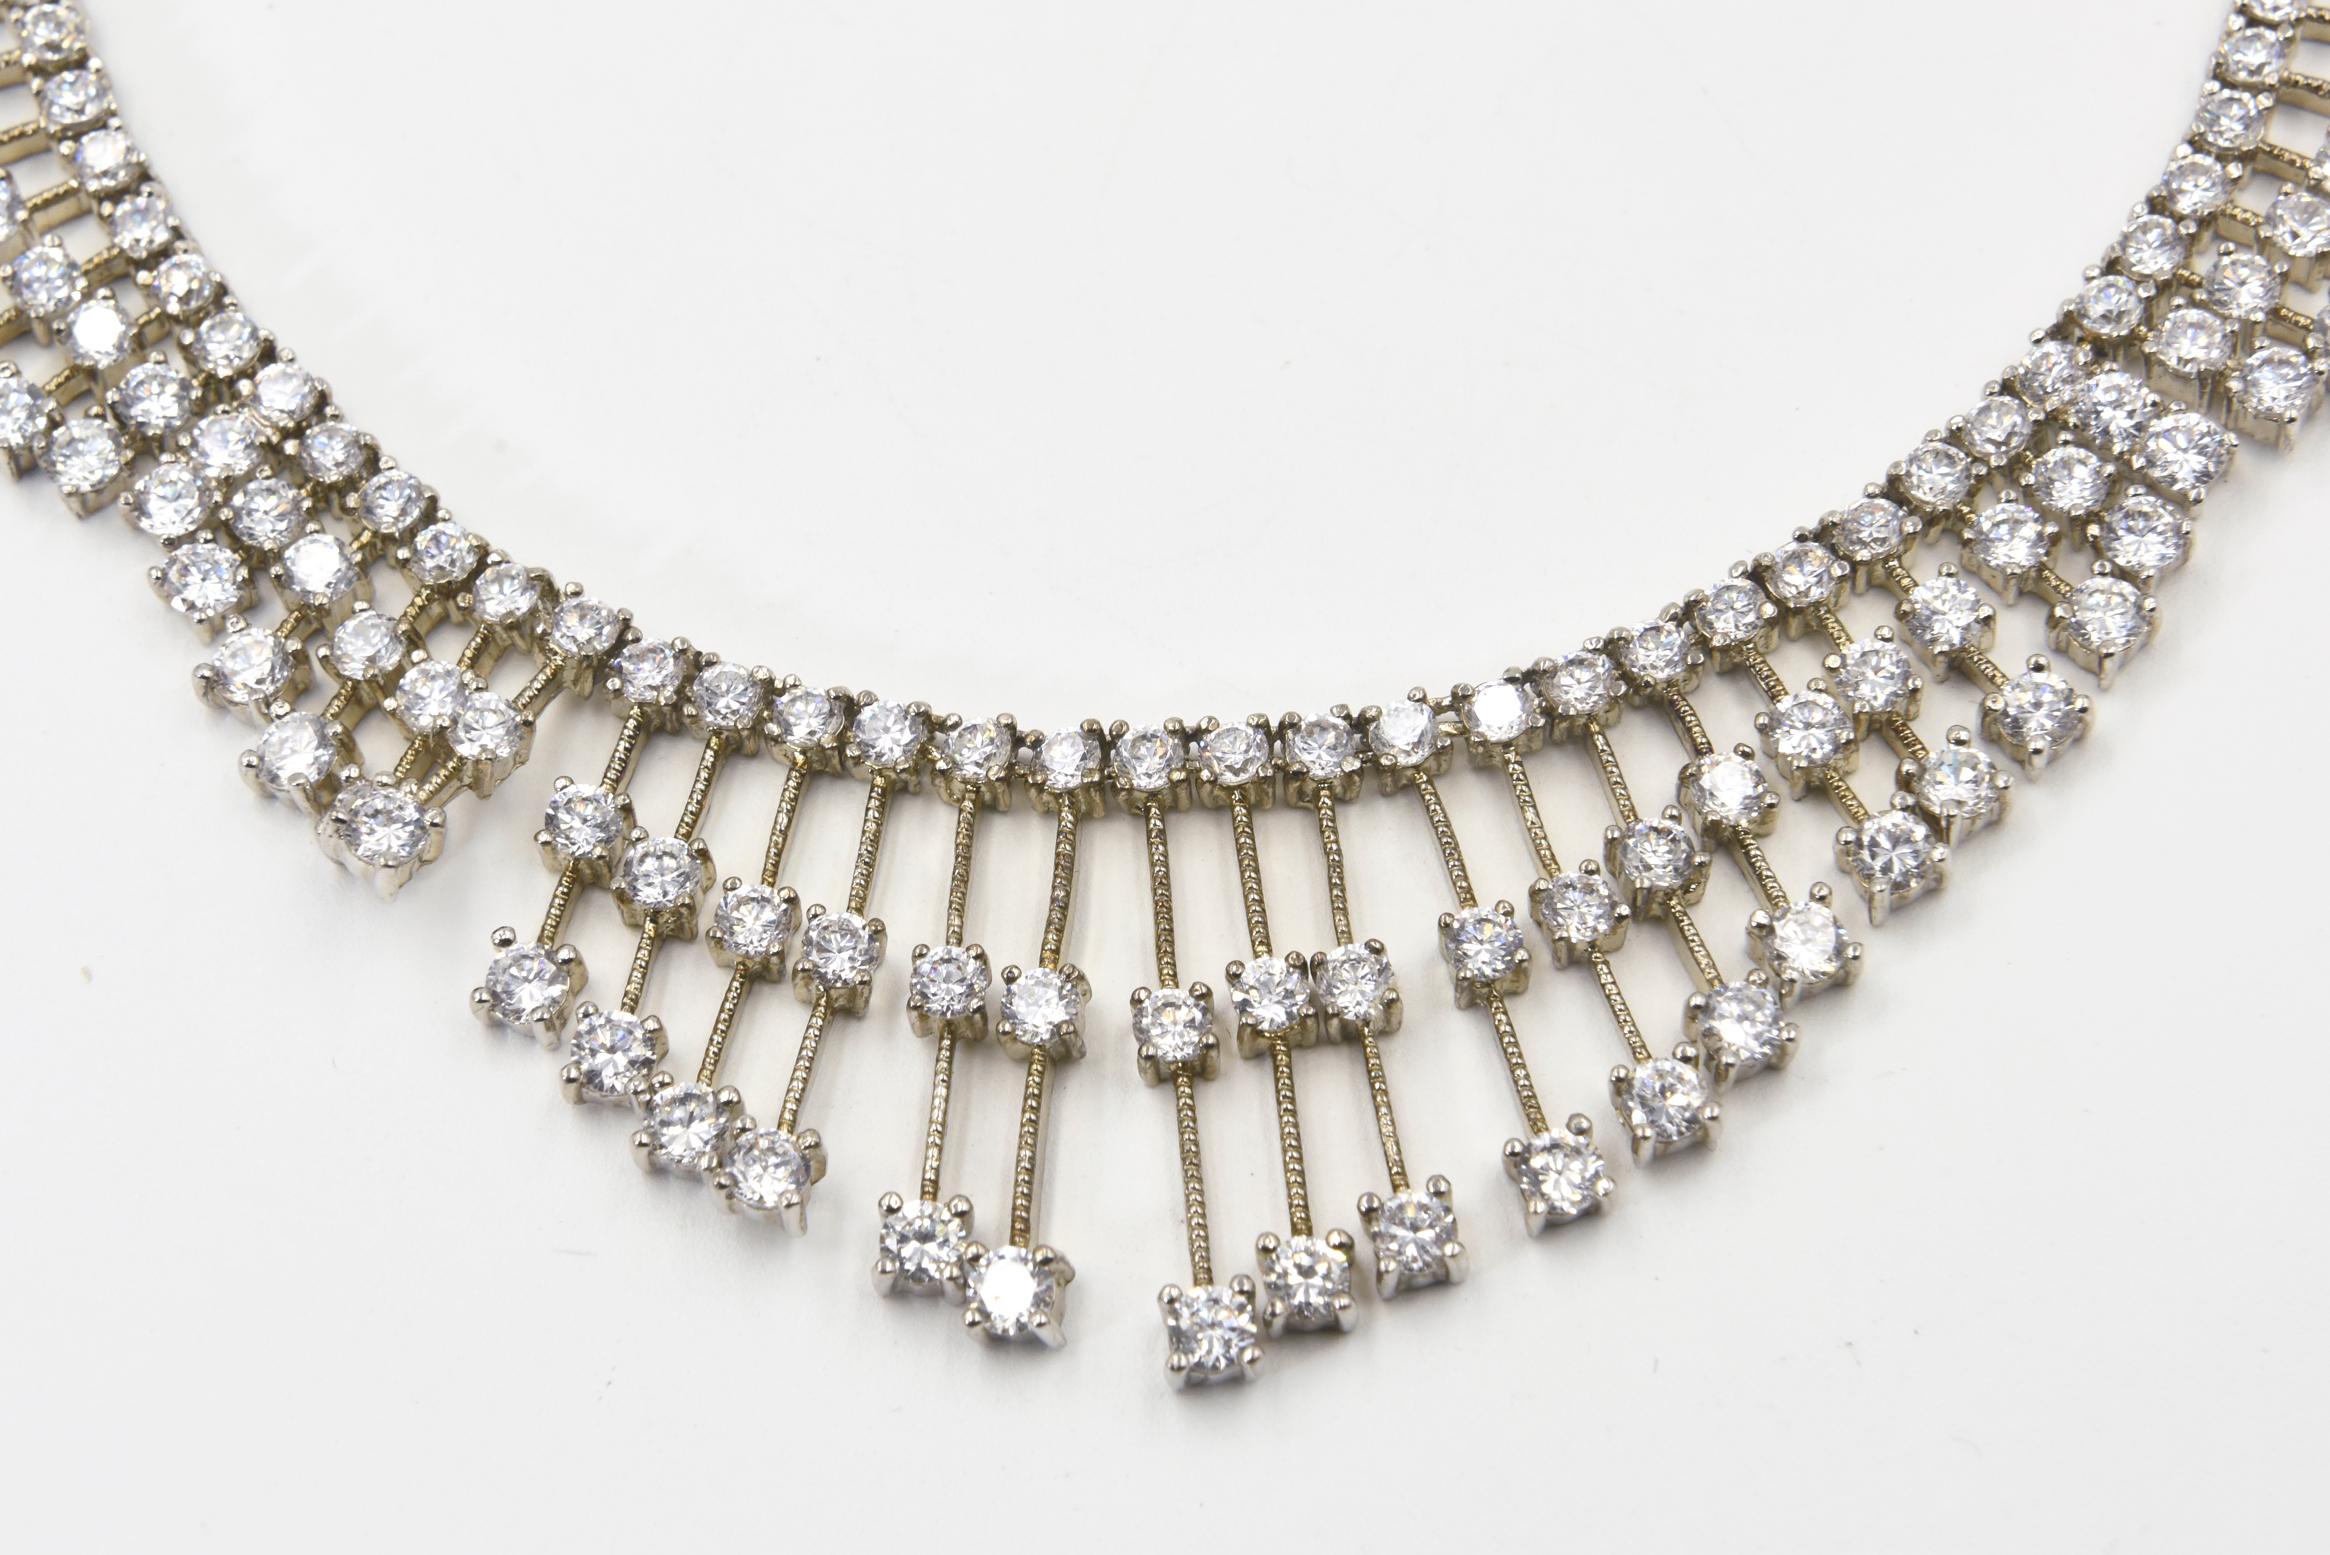 Red carpet style tassel bib necklace made up of various length lines that each have three prong set clear crystals.   The bars have a texture design that makes it look like a screw. The up-and-down pattern makes it look like waves going around the